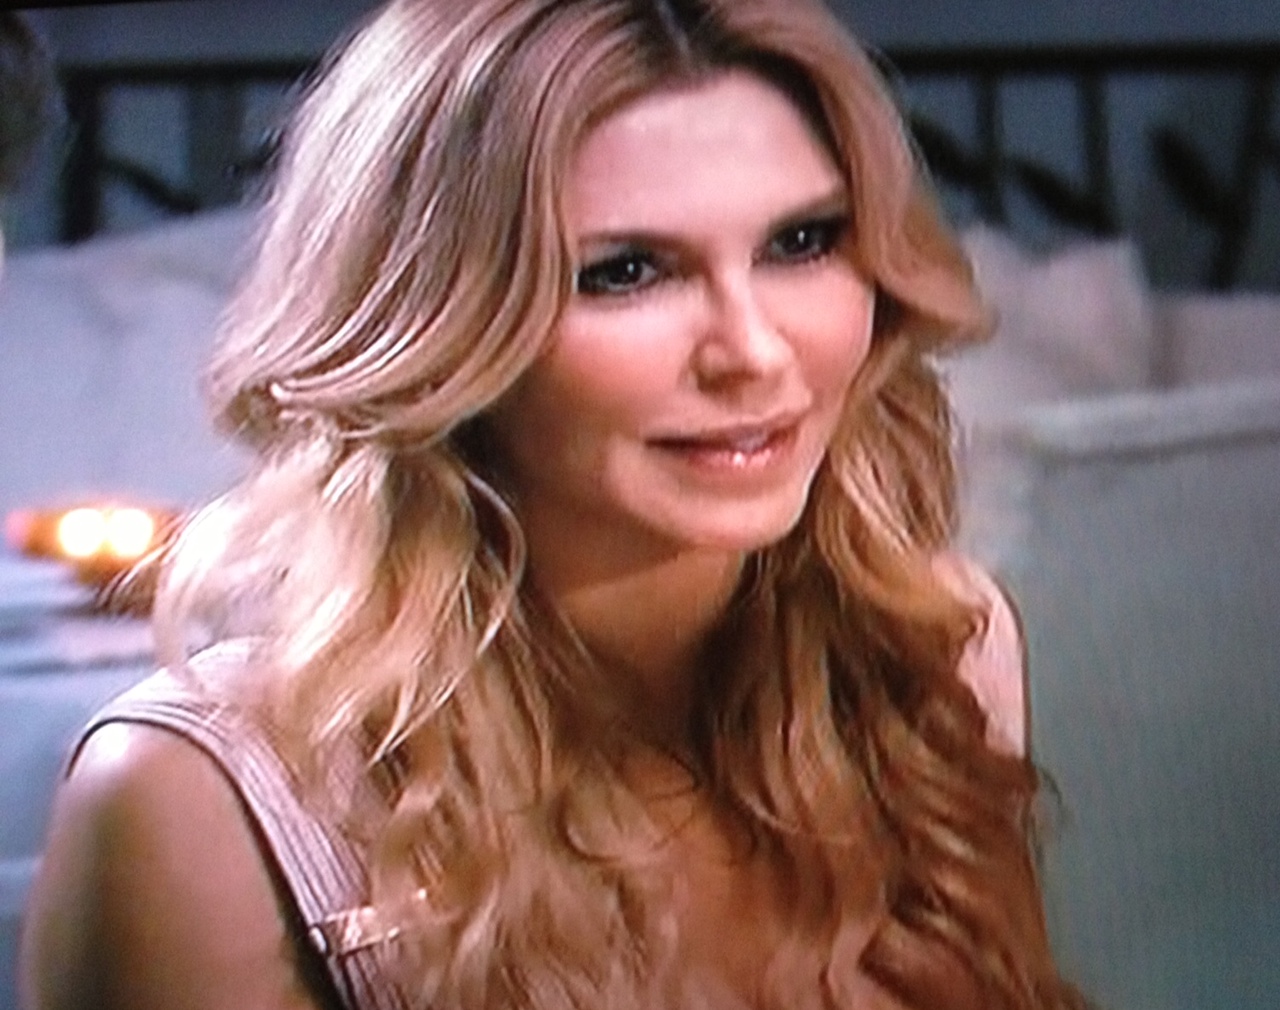 Brandi Glanville displays slender figure in skintight dress while teetering  in stilettos to film scene for Real Housewives